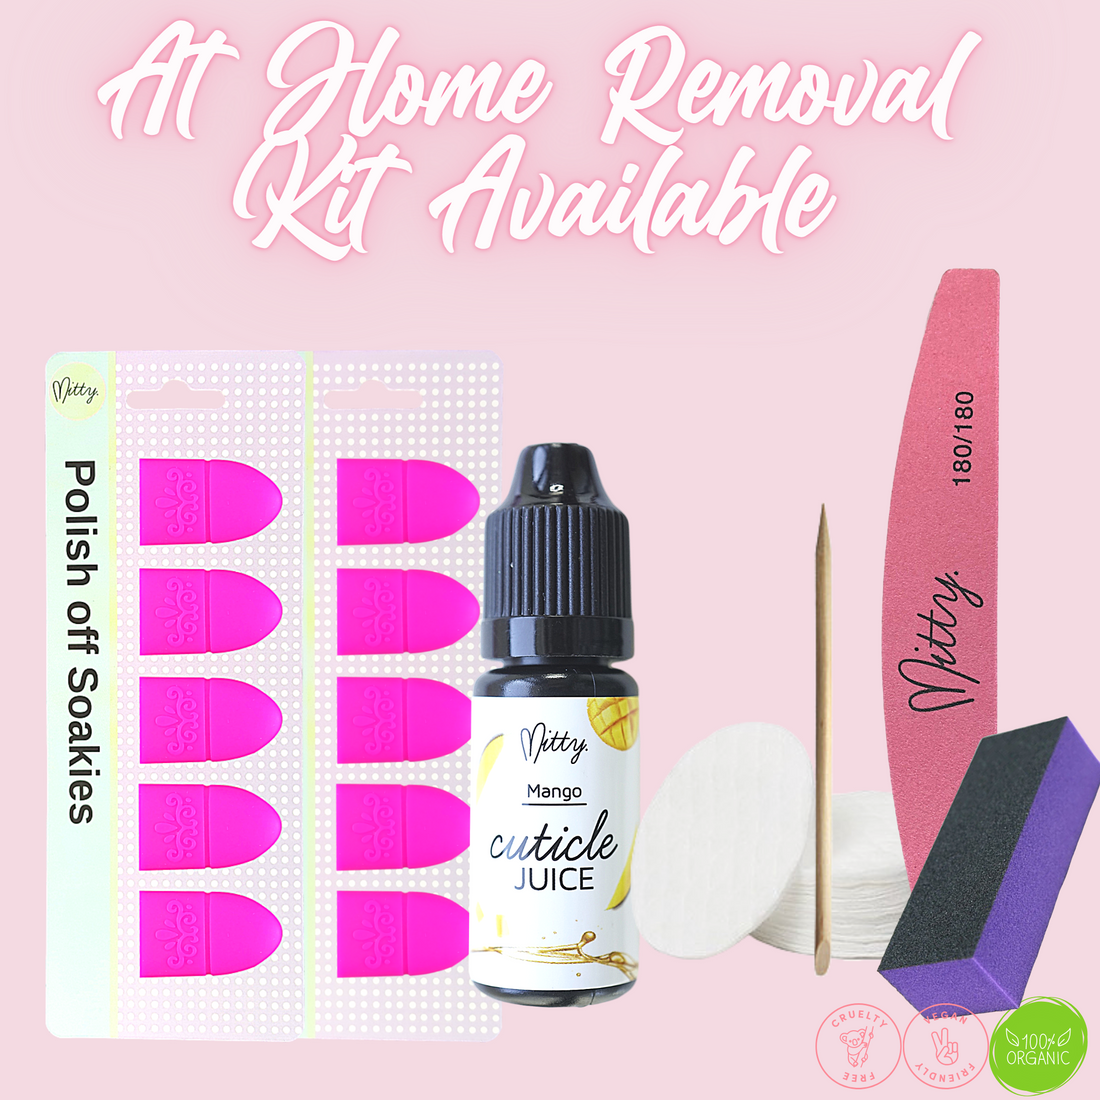  At Home Gel Removal Kit